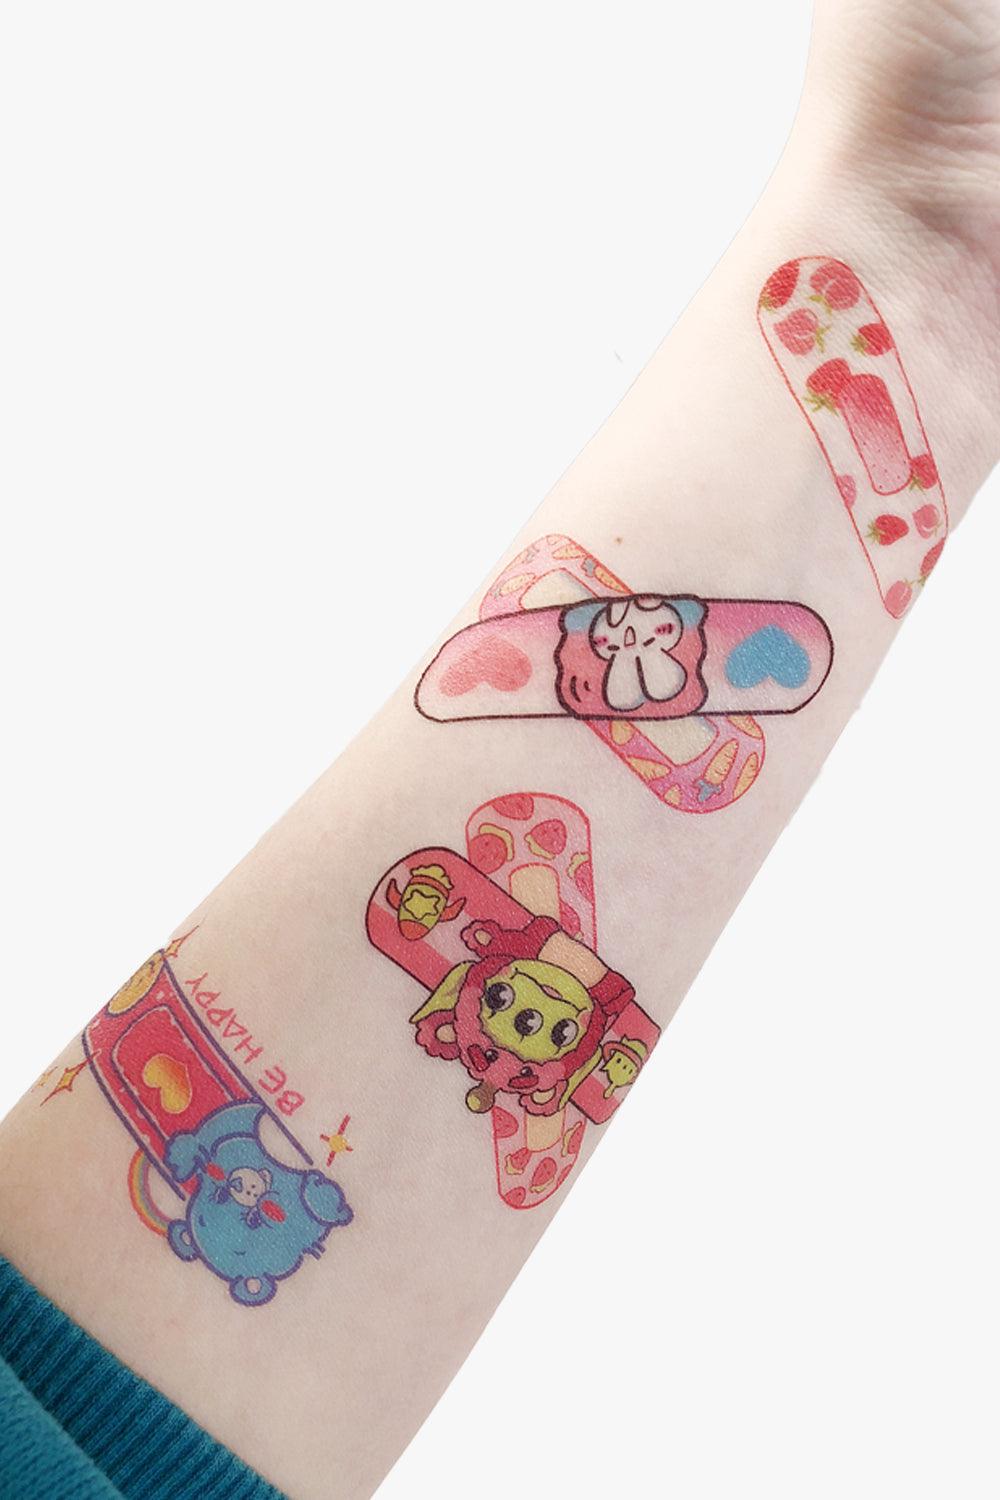 Cute Aesthetic Plaster Temporary Tattoo Set - Aesthetic Clothes Shop